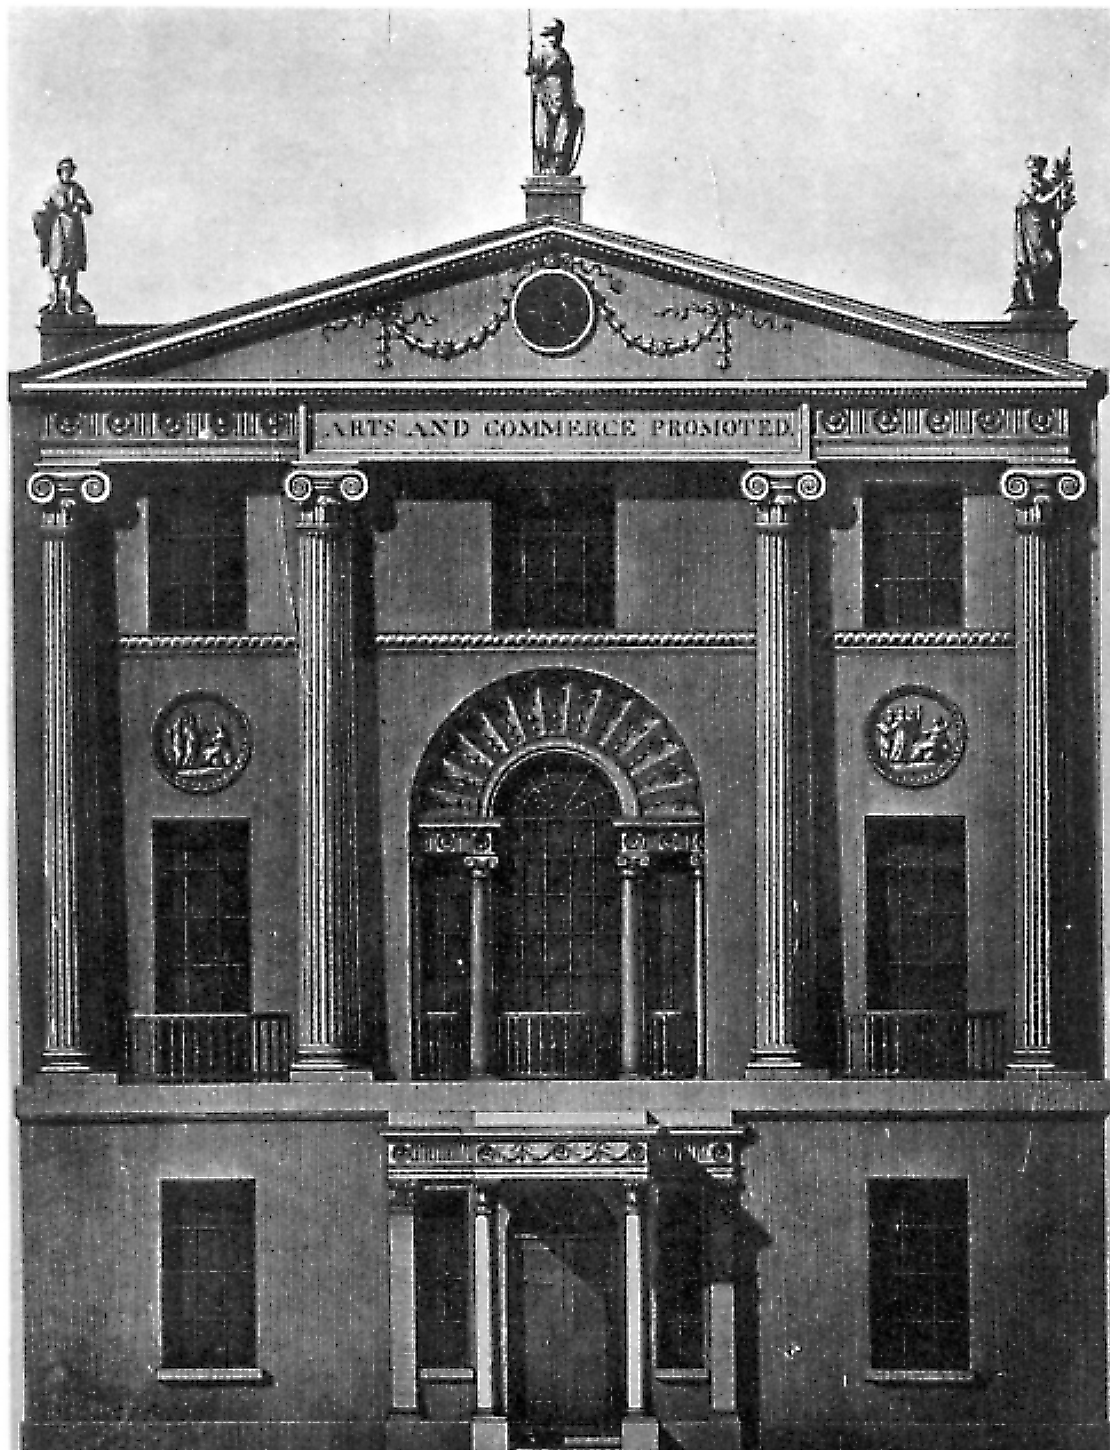 Royal Society of Arts, Manufactures and Commerce - RSA London, from the Works in Architecture of Robert and James Adam, Published as the Act directs January 1773